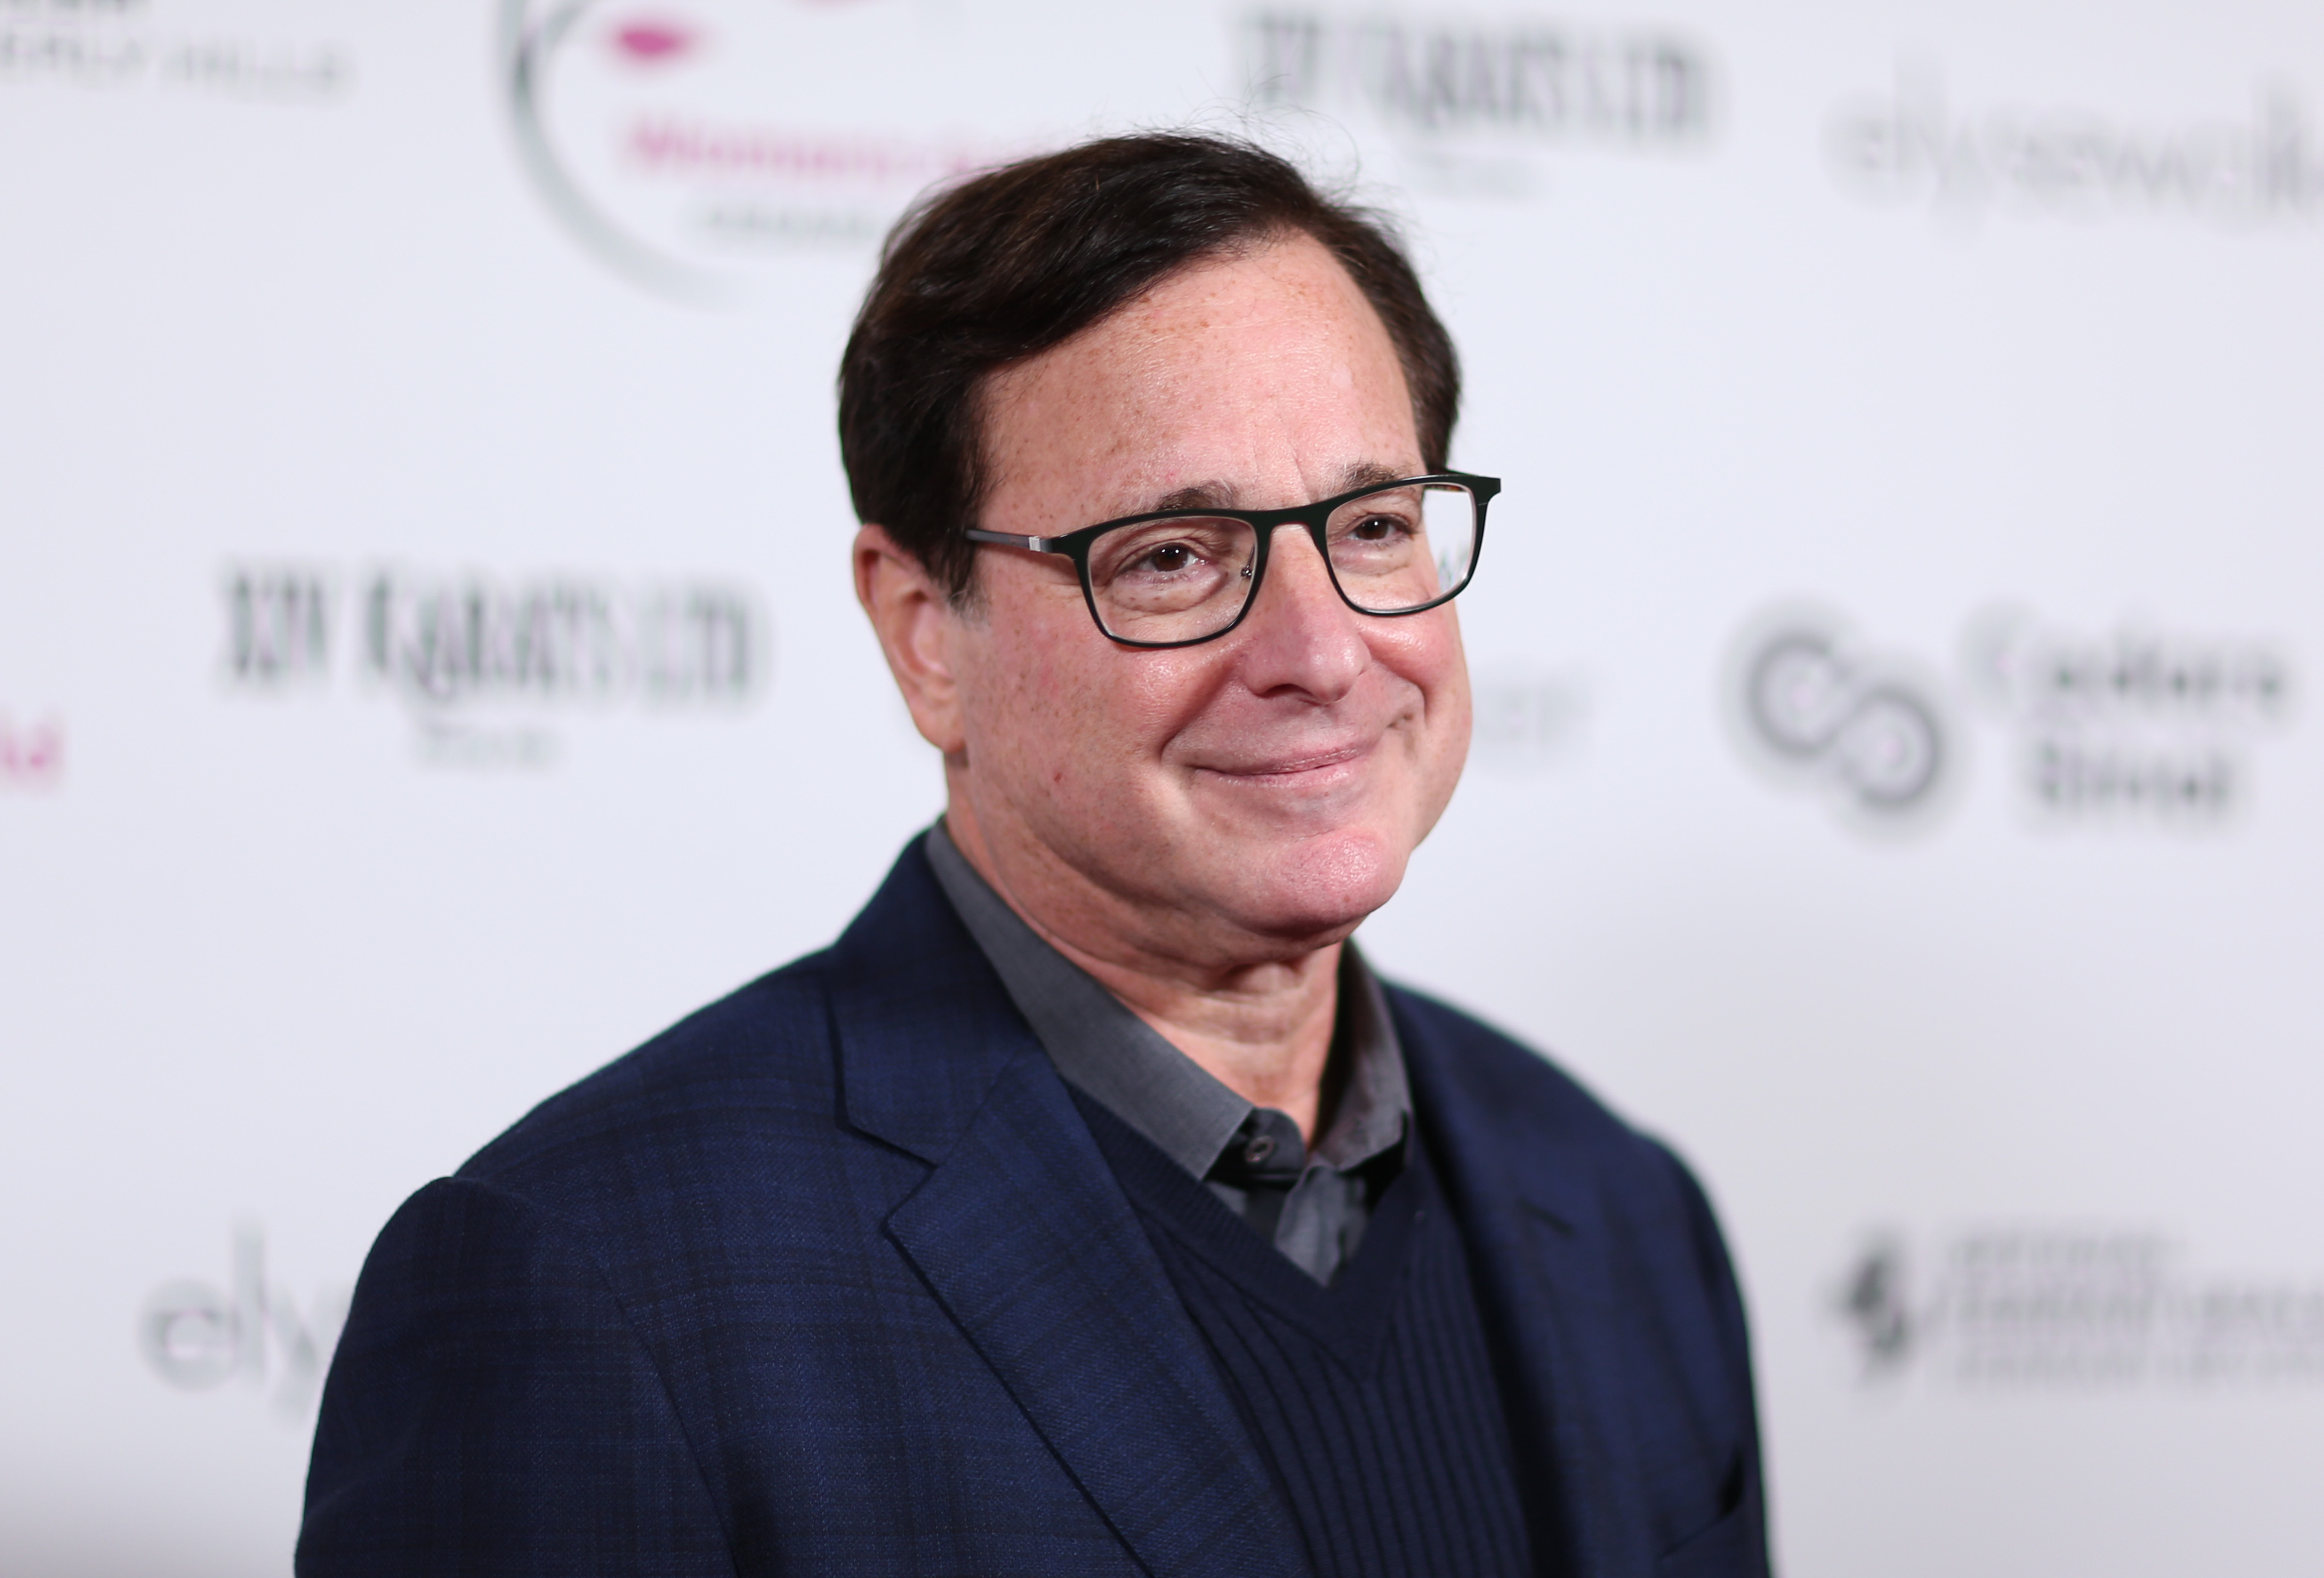 Bob Saget wearing glasses and standing in front of white background